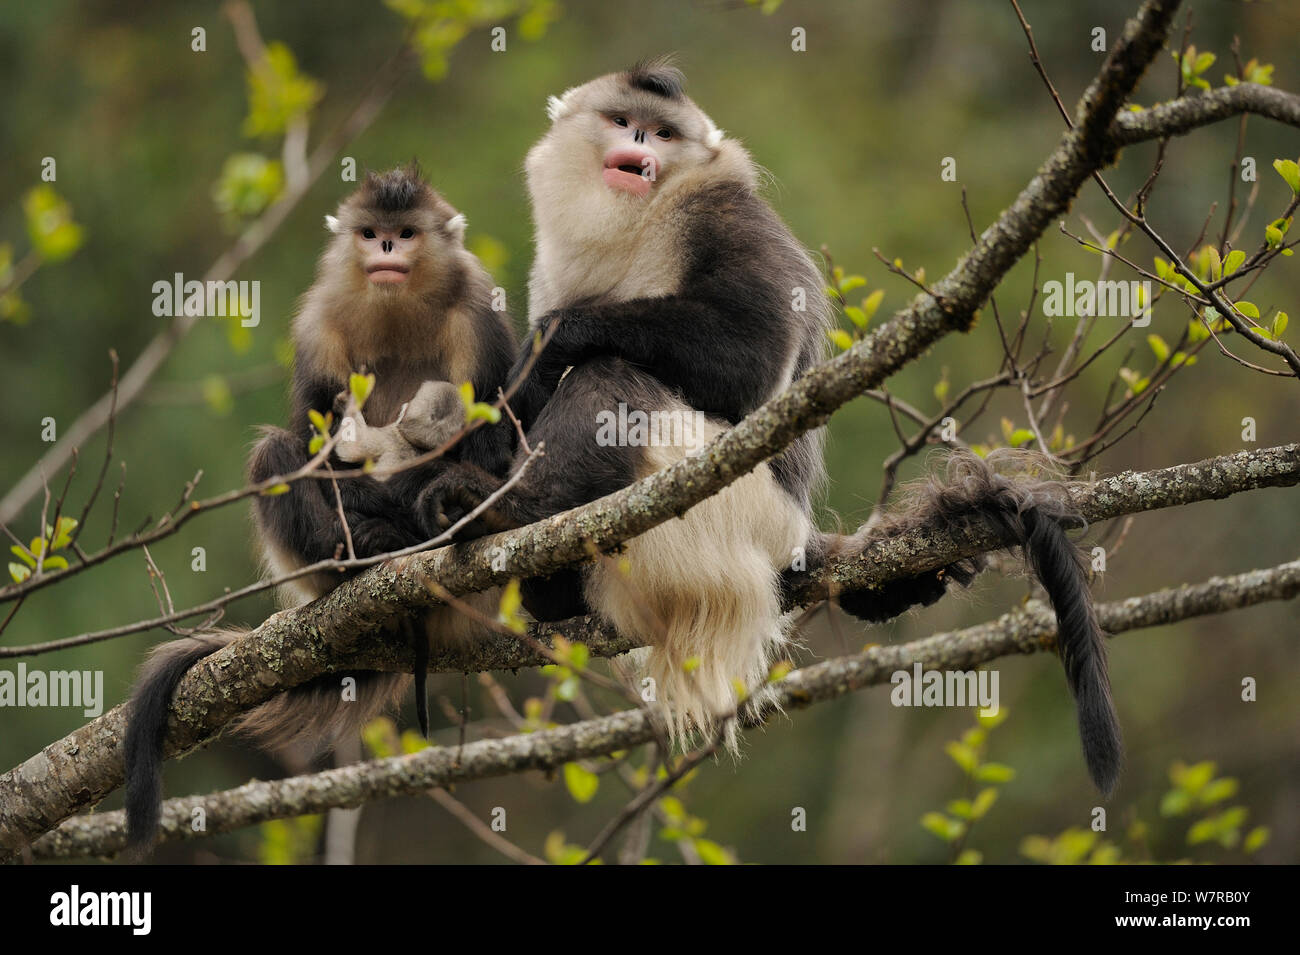 Yunnan Snub-nosed monkey (Rhinopithecus bieti) two adults, one with a baby, Ta Chen NP, Yunnan province, China Stock Photo